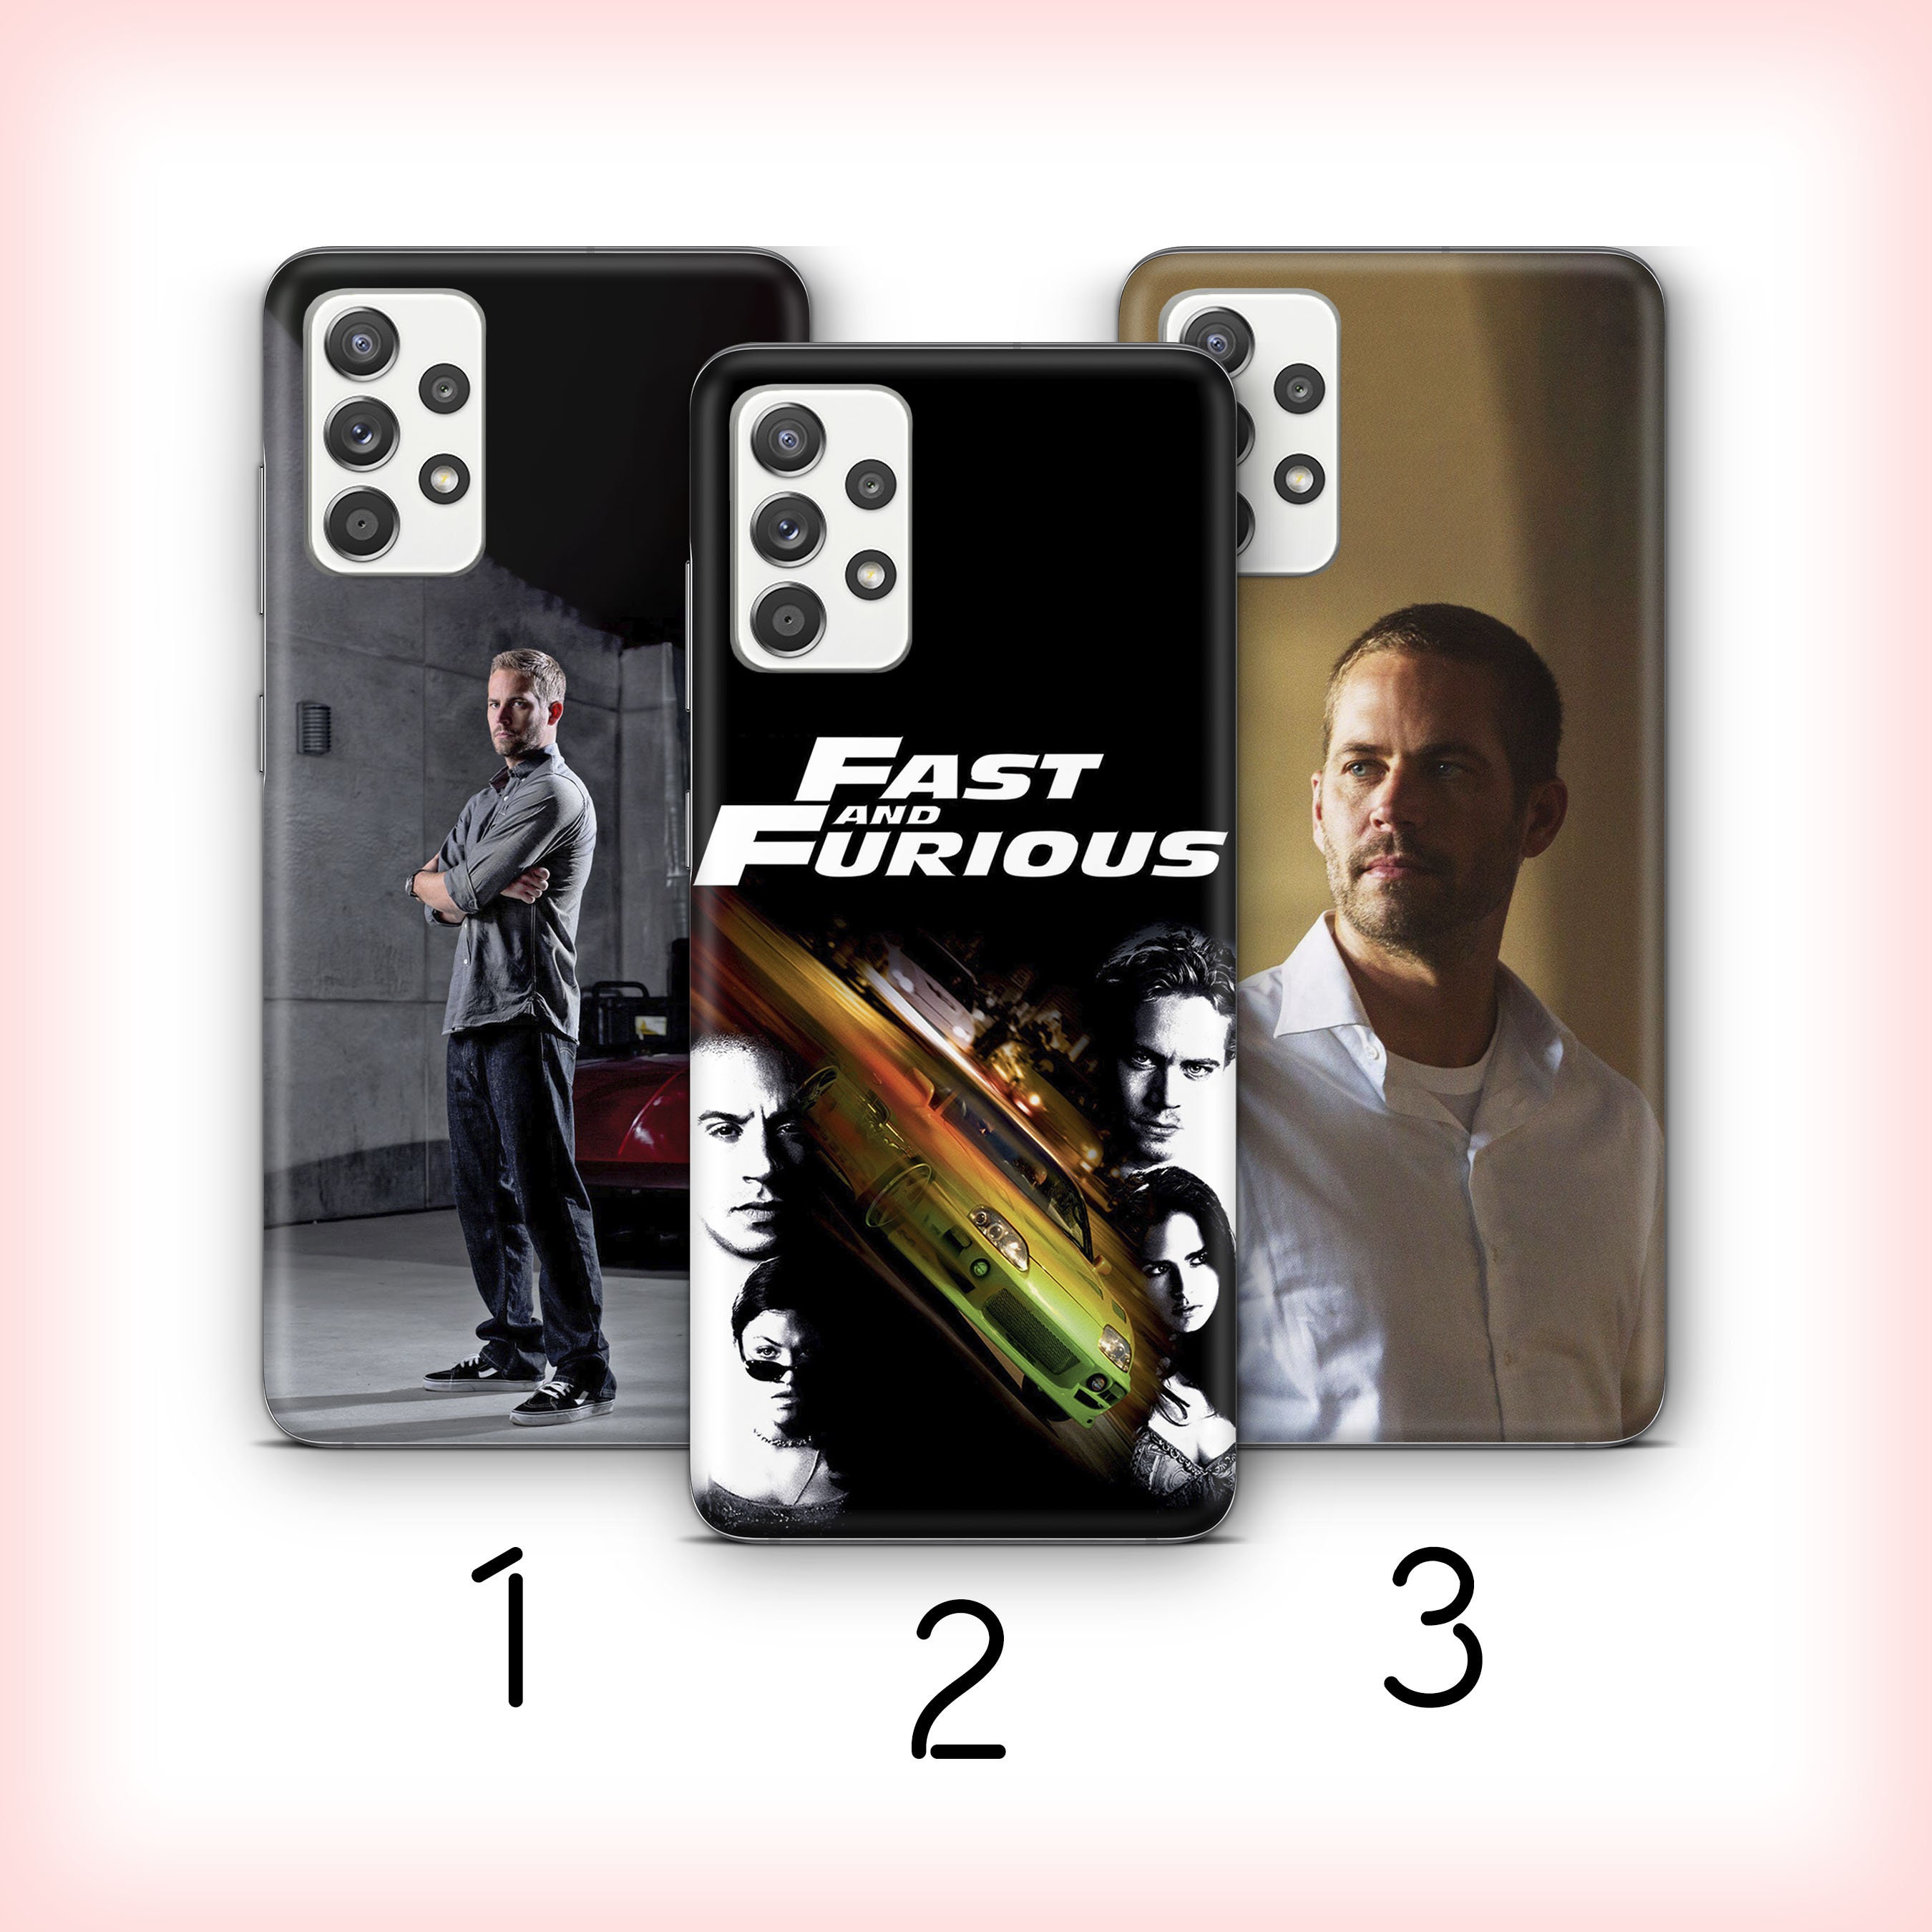 Buy Paul Walker 8 for SAMSUNG A12 A32 A52 A72 A30 A50 A70 A31 A51 A Series  Case Cover American Action Film Movie Actor Too Fast and Furious Online in  India 